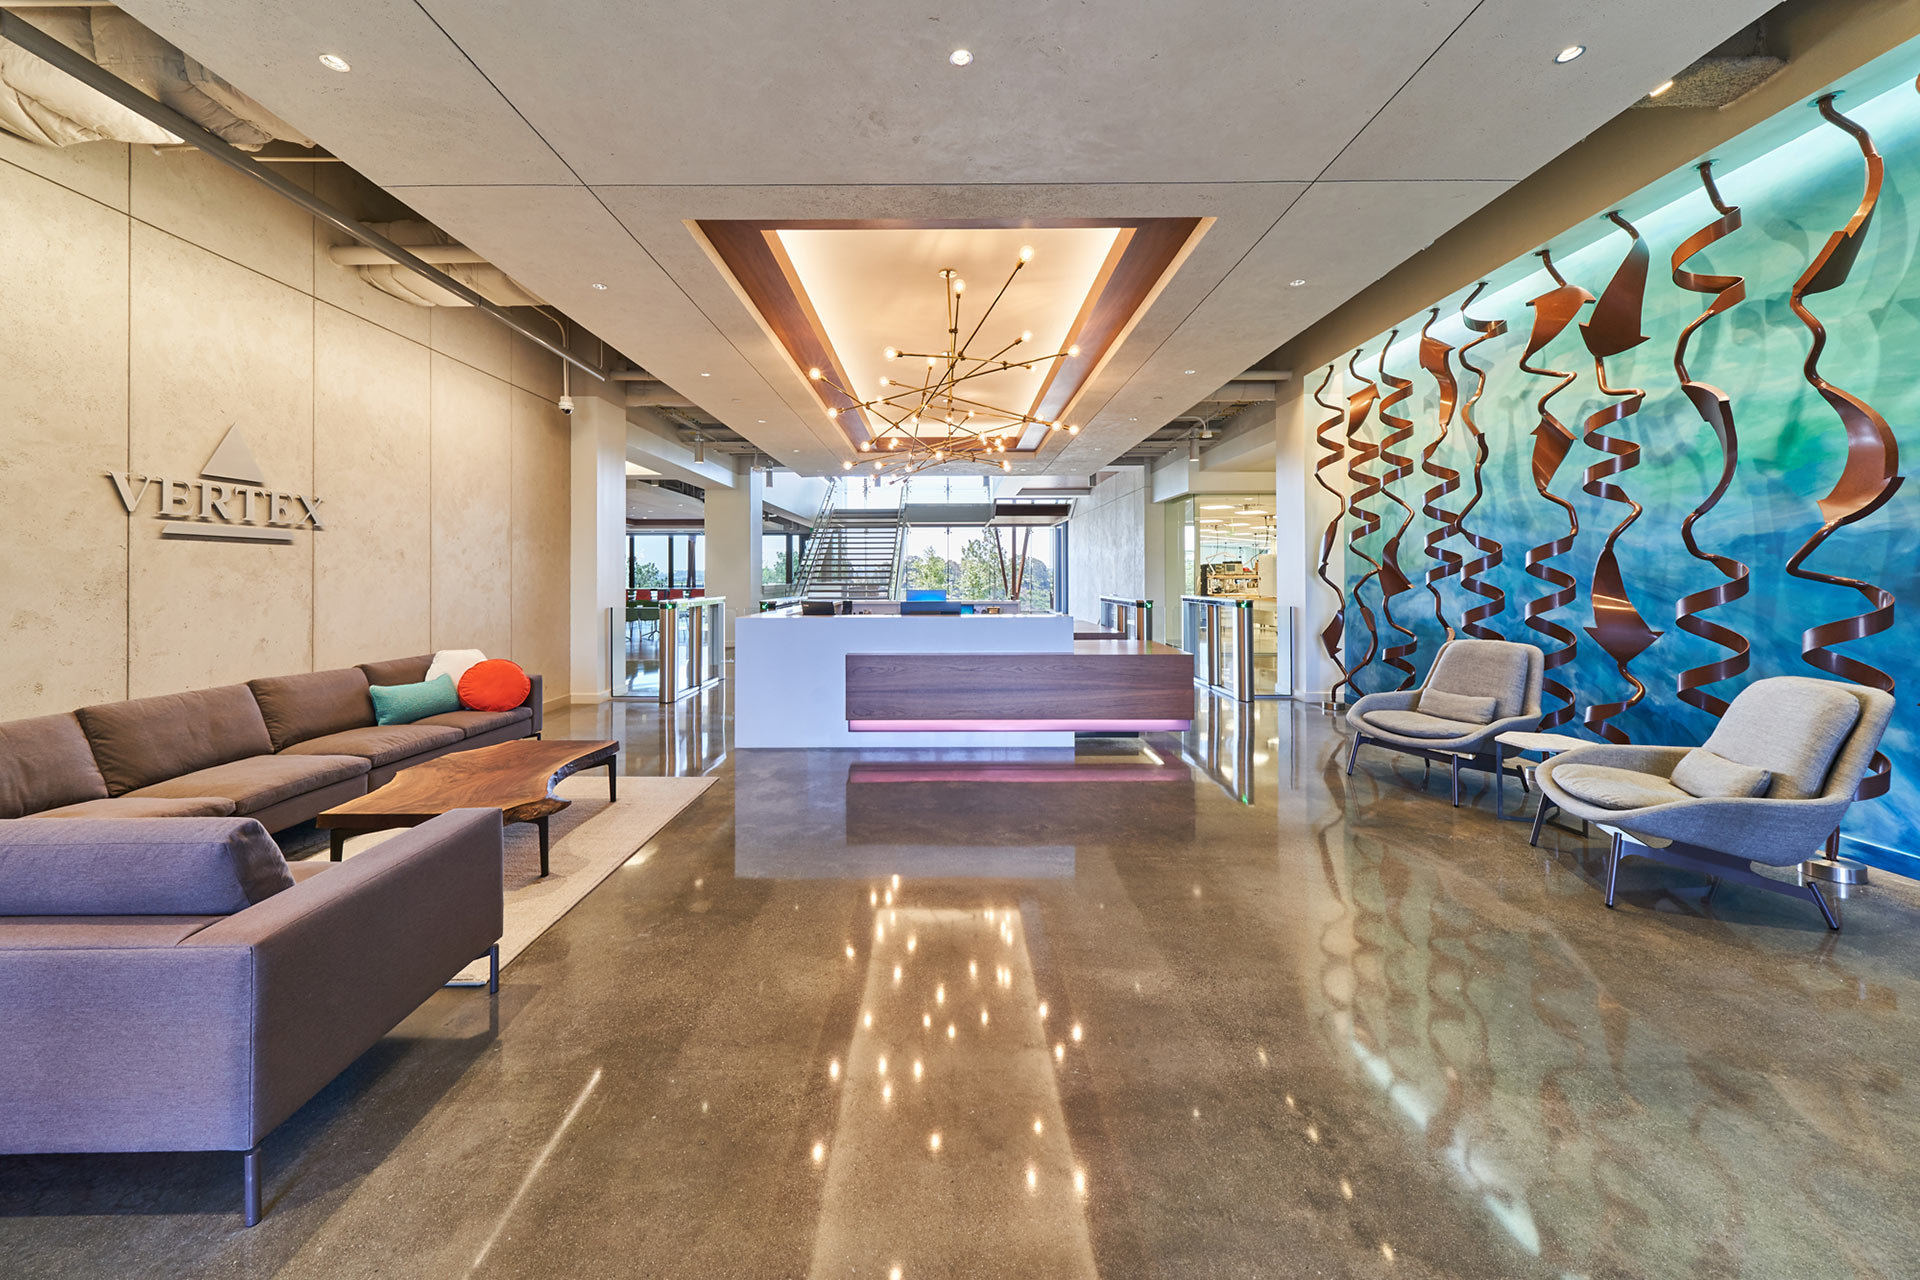 Interior at Vertex Pharmaceuticals life science facility, lobby and front desk with central stair in the background